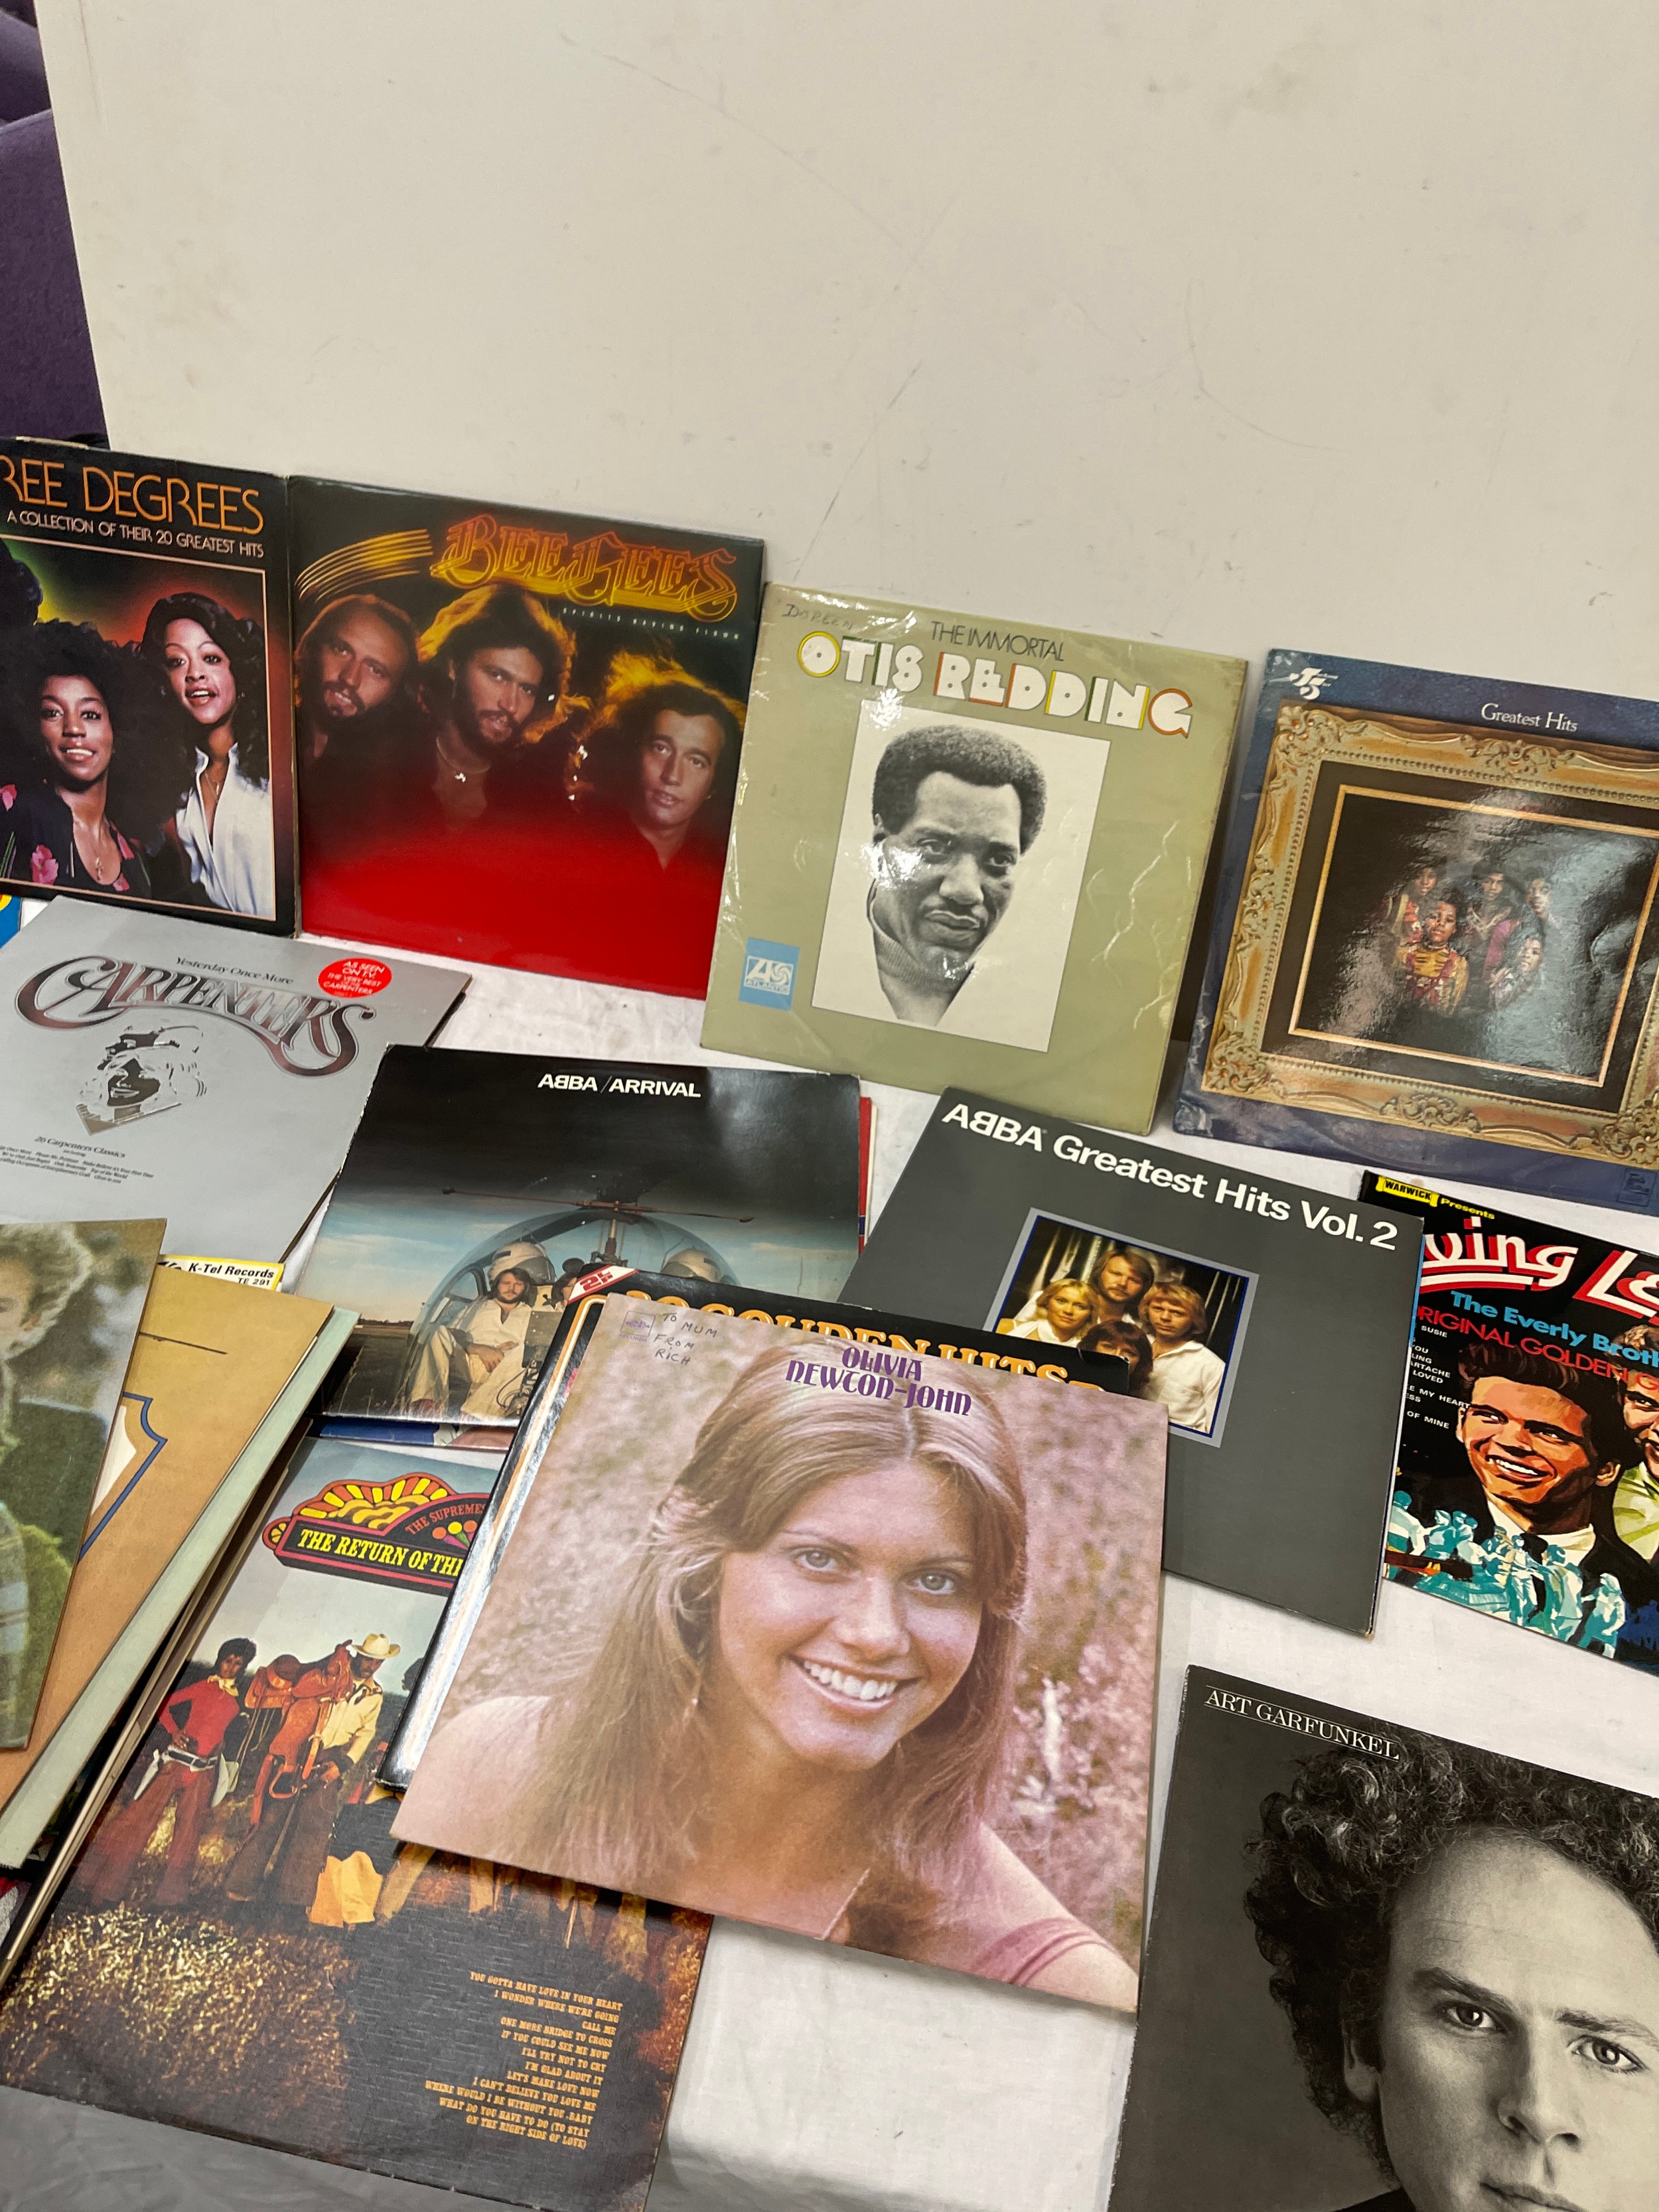 Selection of records includes Bee gees, otis rodding, living legends, abba etc - Image 4 of 4